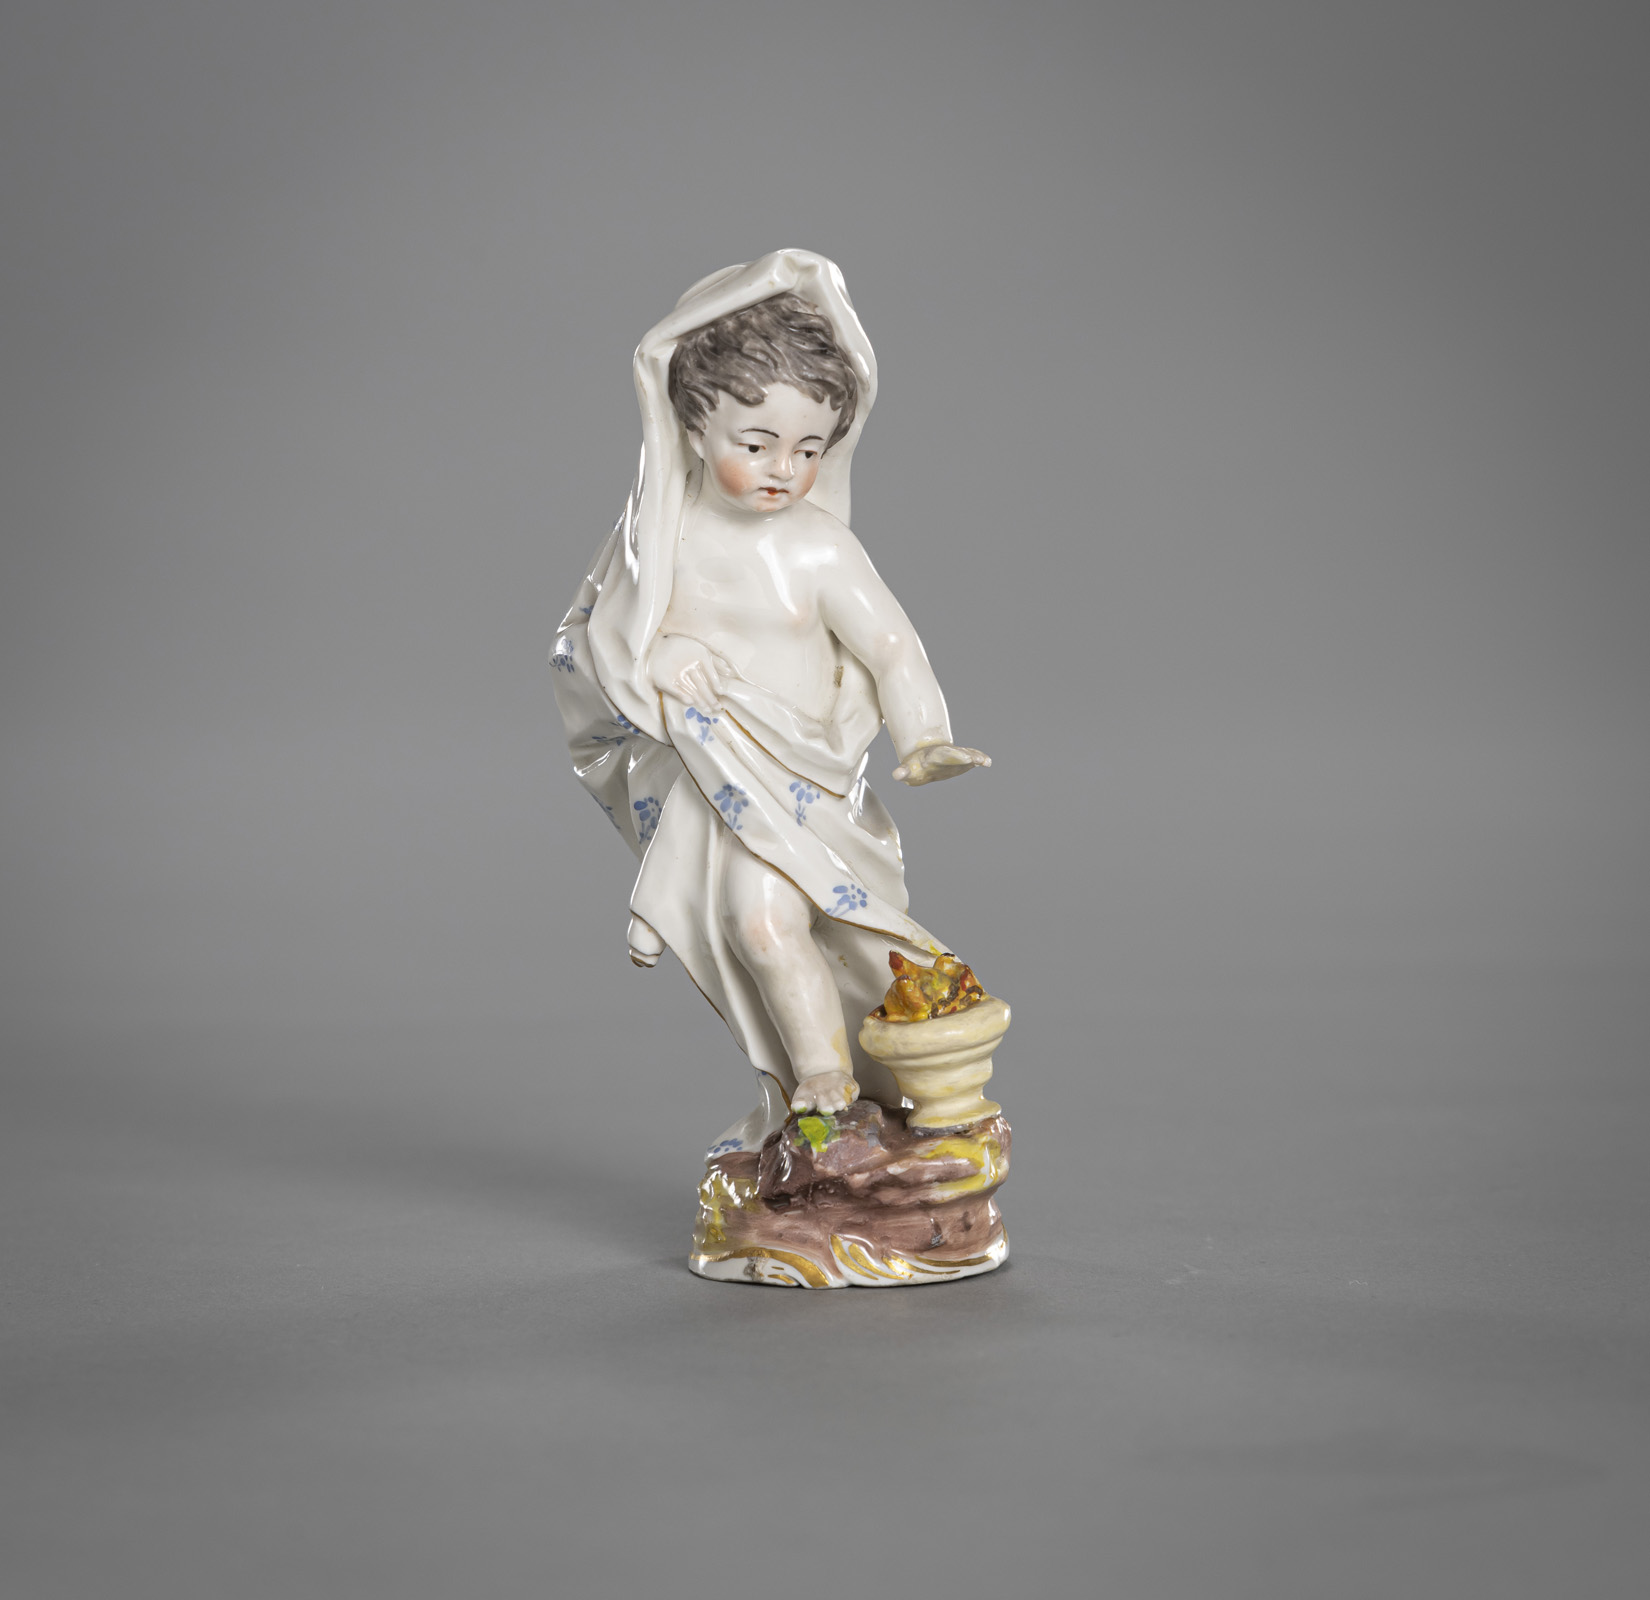 <b>A FIGURINE OF A PUTTO DEPICTING THE WINTER</b>